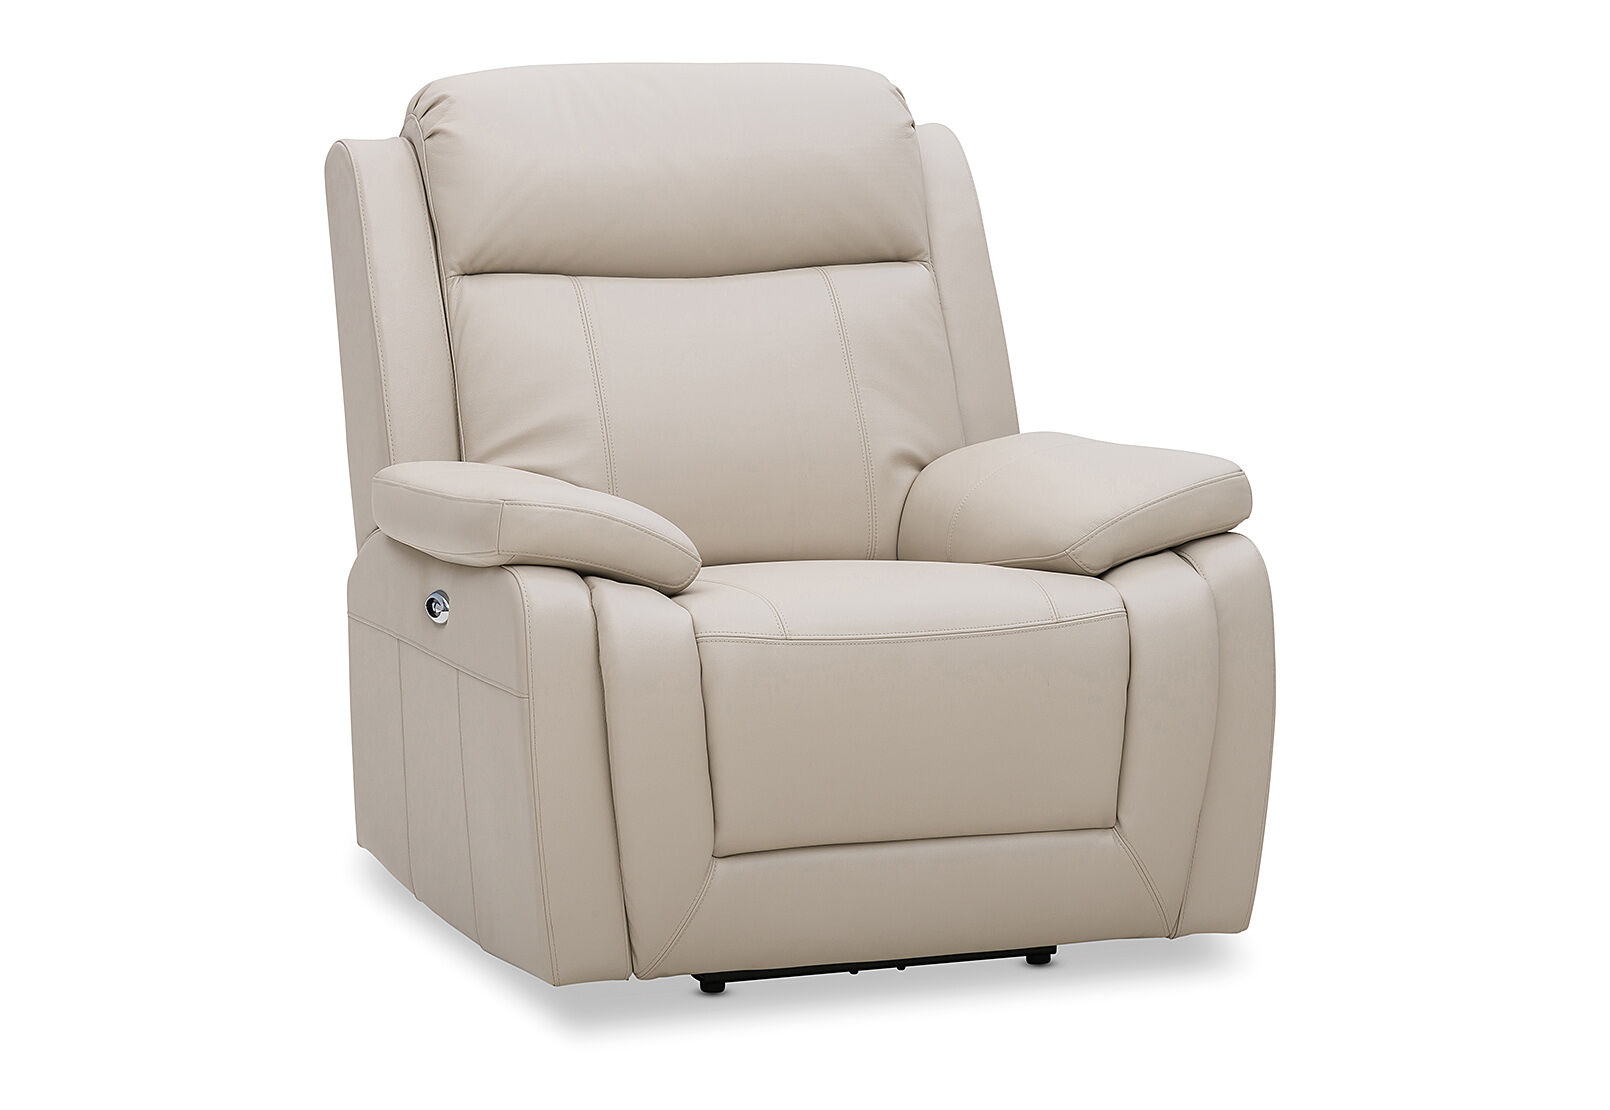 BEIGE SAN MARCO Leather Electric Recliner